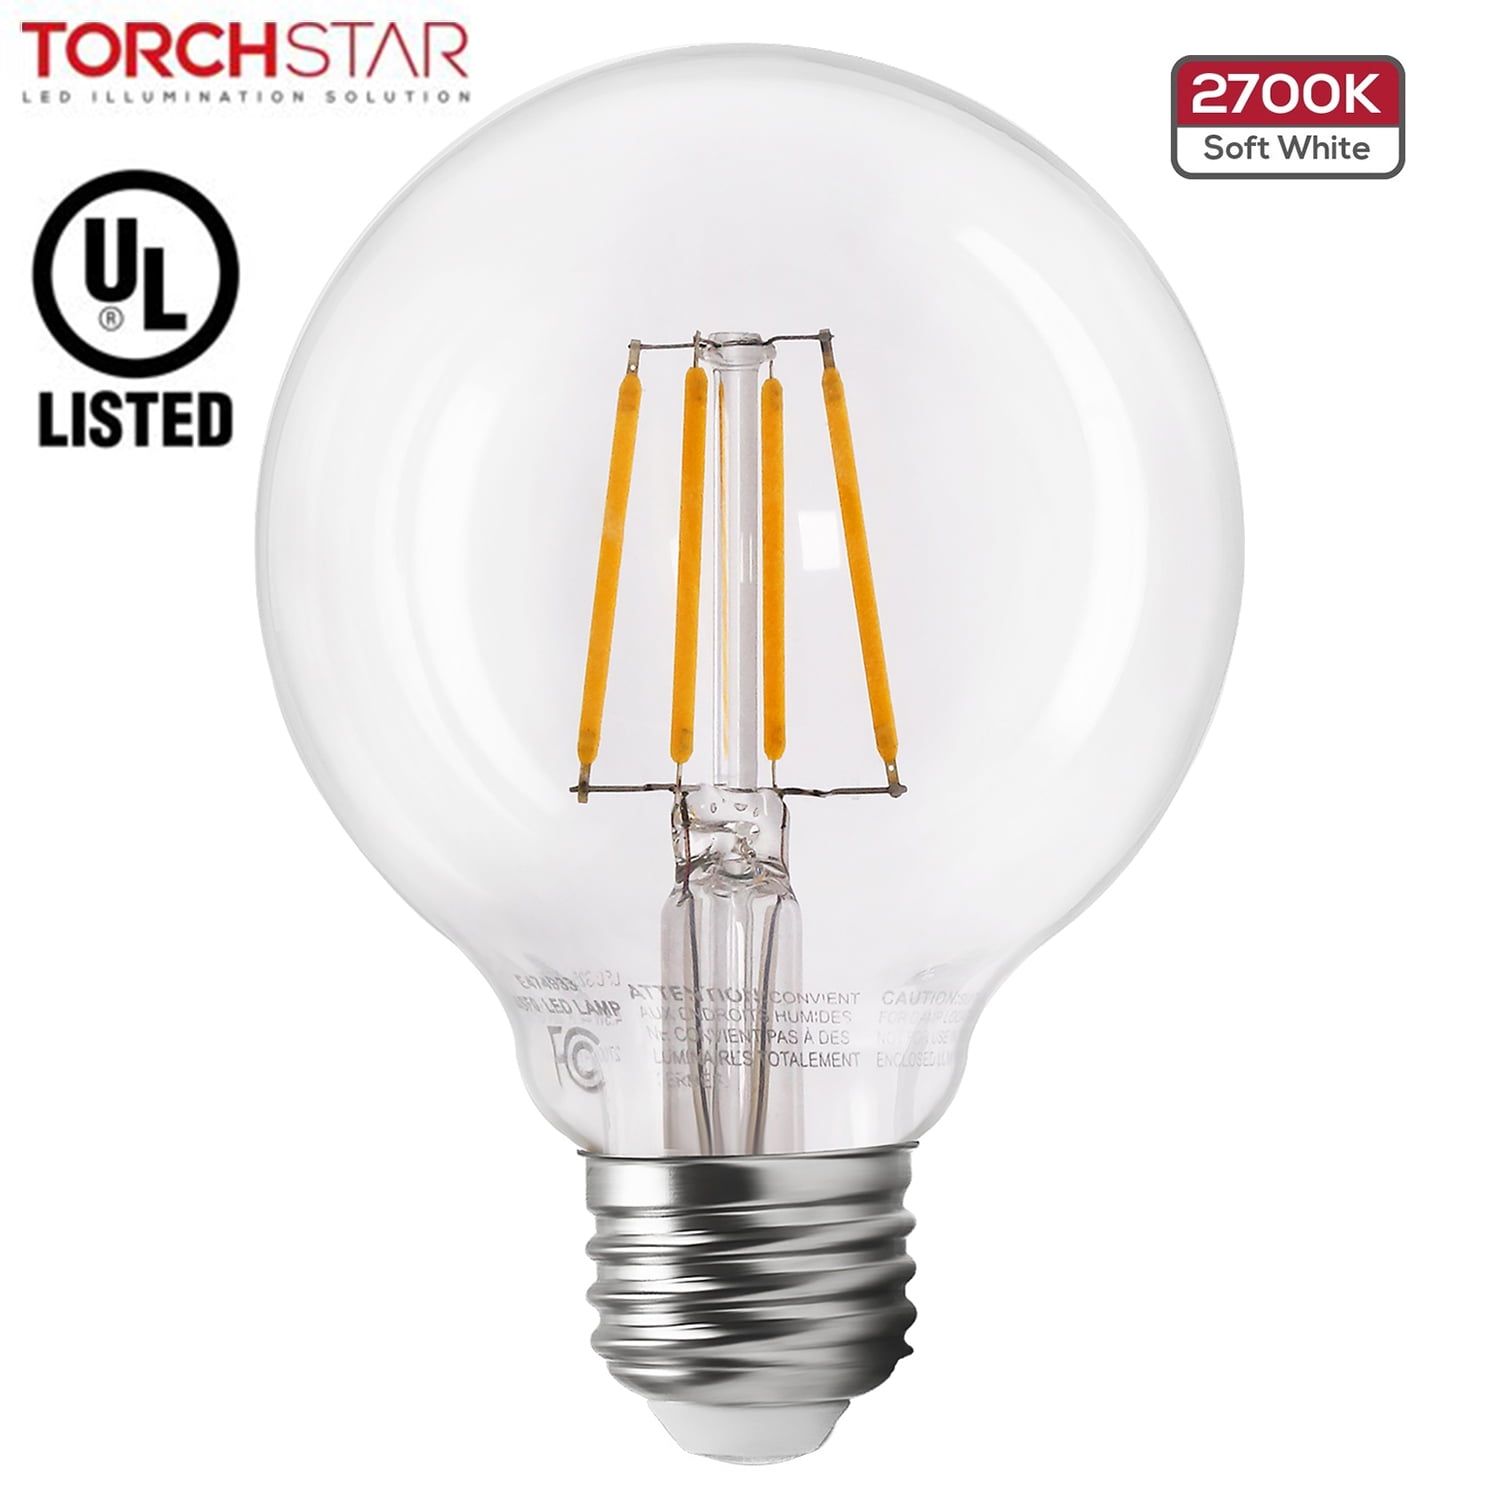 TORCHSTAR GU24 Base A19 LED Light Bulb 3 Years Warranty Energy Star & UL-Listed Pack of 4 Replacing CFL Ceiling Light for Home 3000K Warm White 310° 60W Equiv 9W Dimmable 840 Lumens 